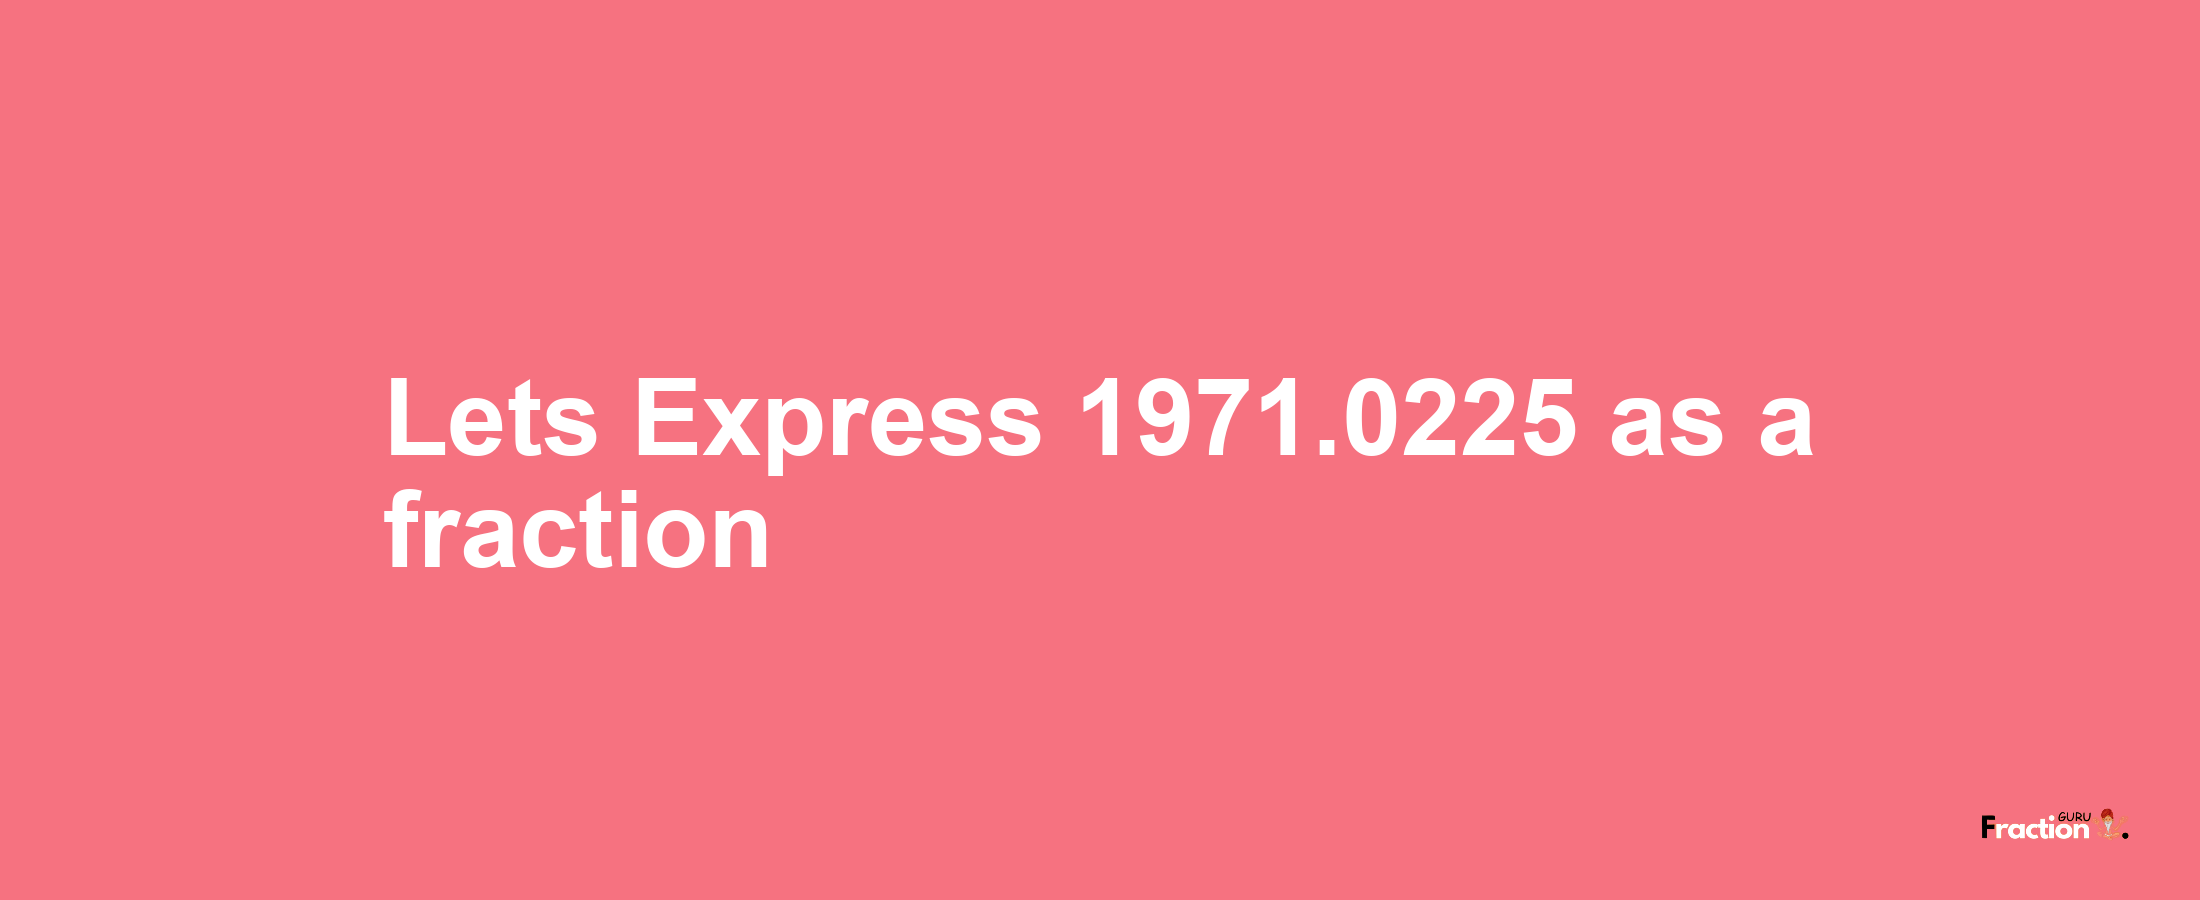 Lets Express 1971.0225 as afraction